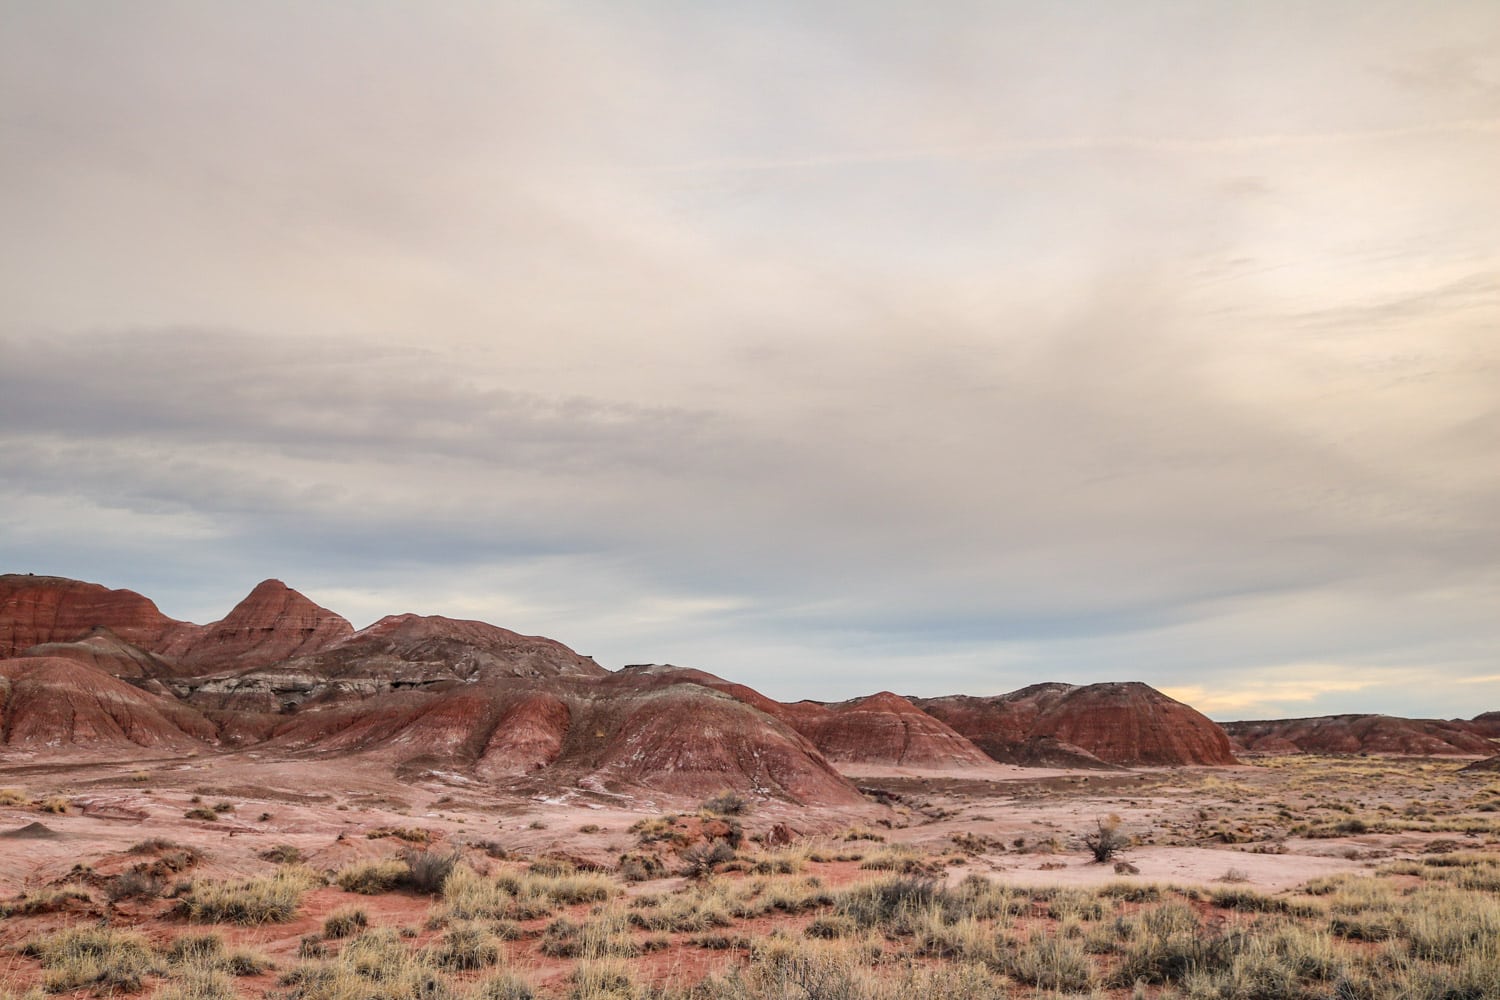 Morning in the Painted Desert, Petrified Forest National Park